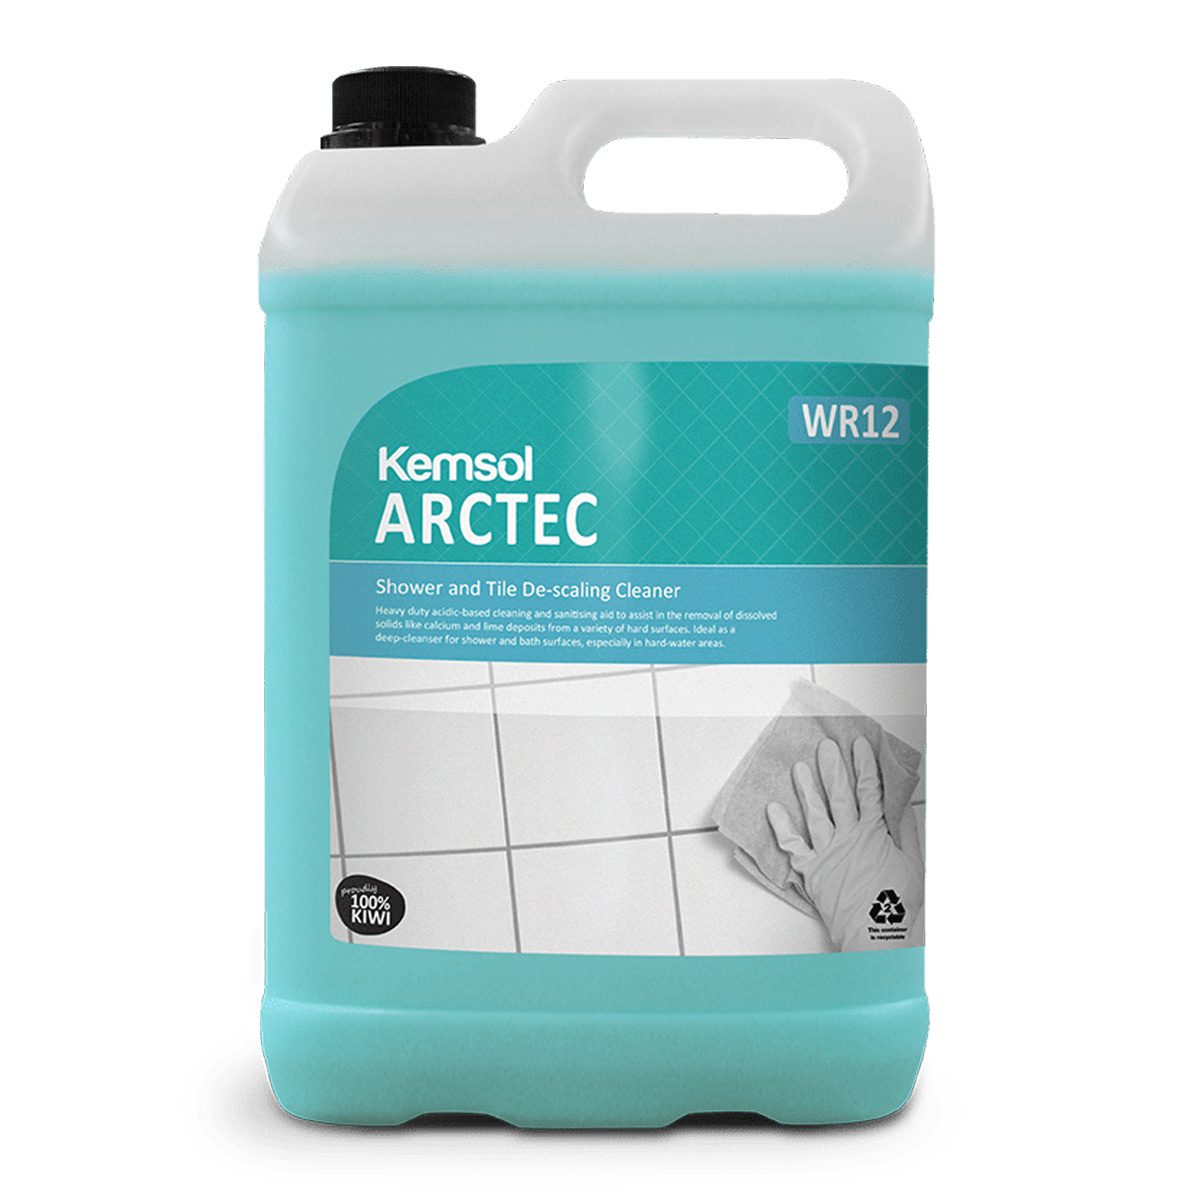 cleaning-products-washroom-arctec-cleaner-5L-litre-heavy-duty-acidic-based-cleaning-sanitising-removal-dissolved-solids-calcium-lime-deposits-deep-cleanser-shower-bath-surfaces-vjs-distributors-KARC